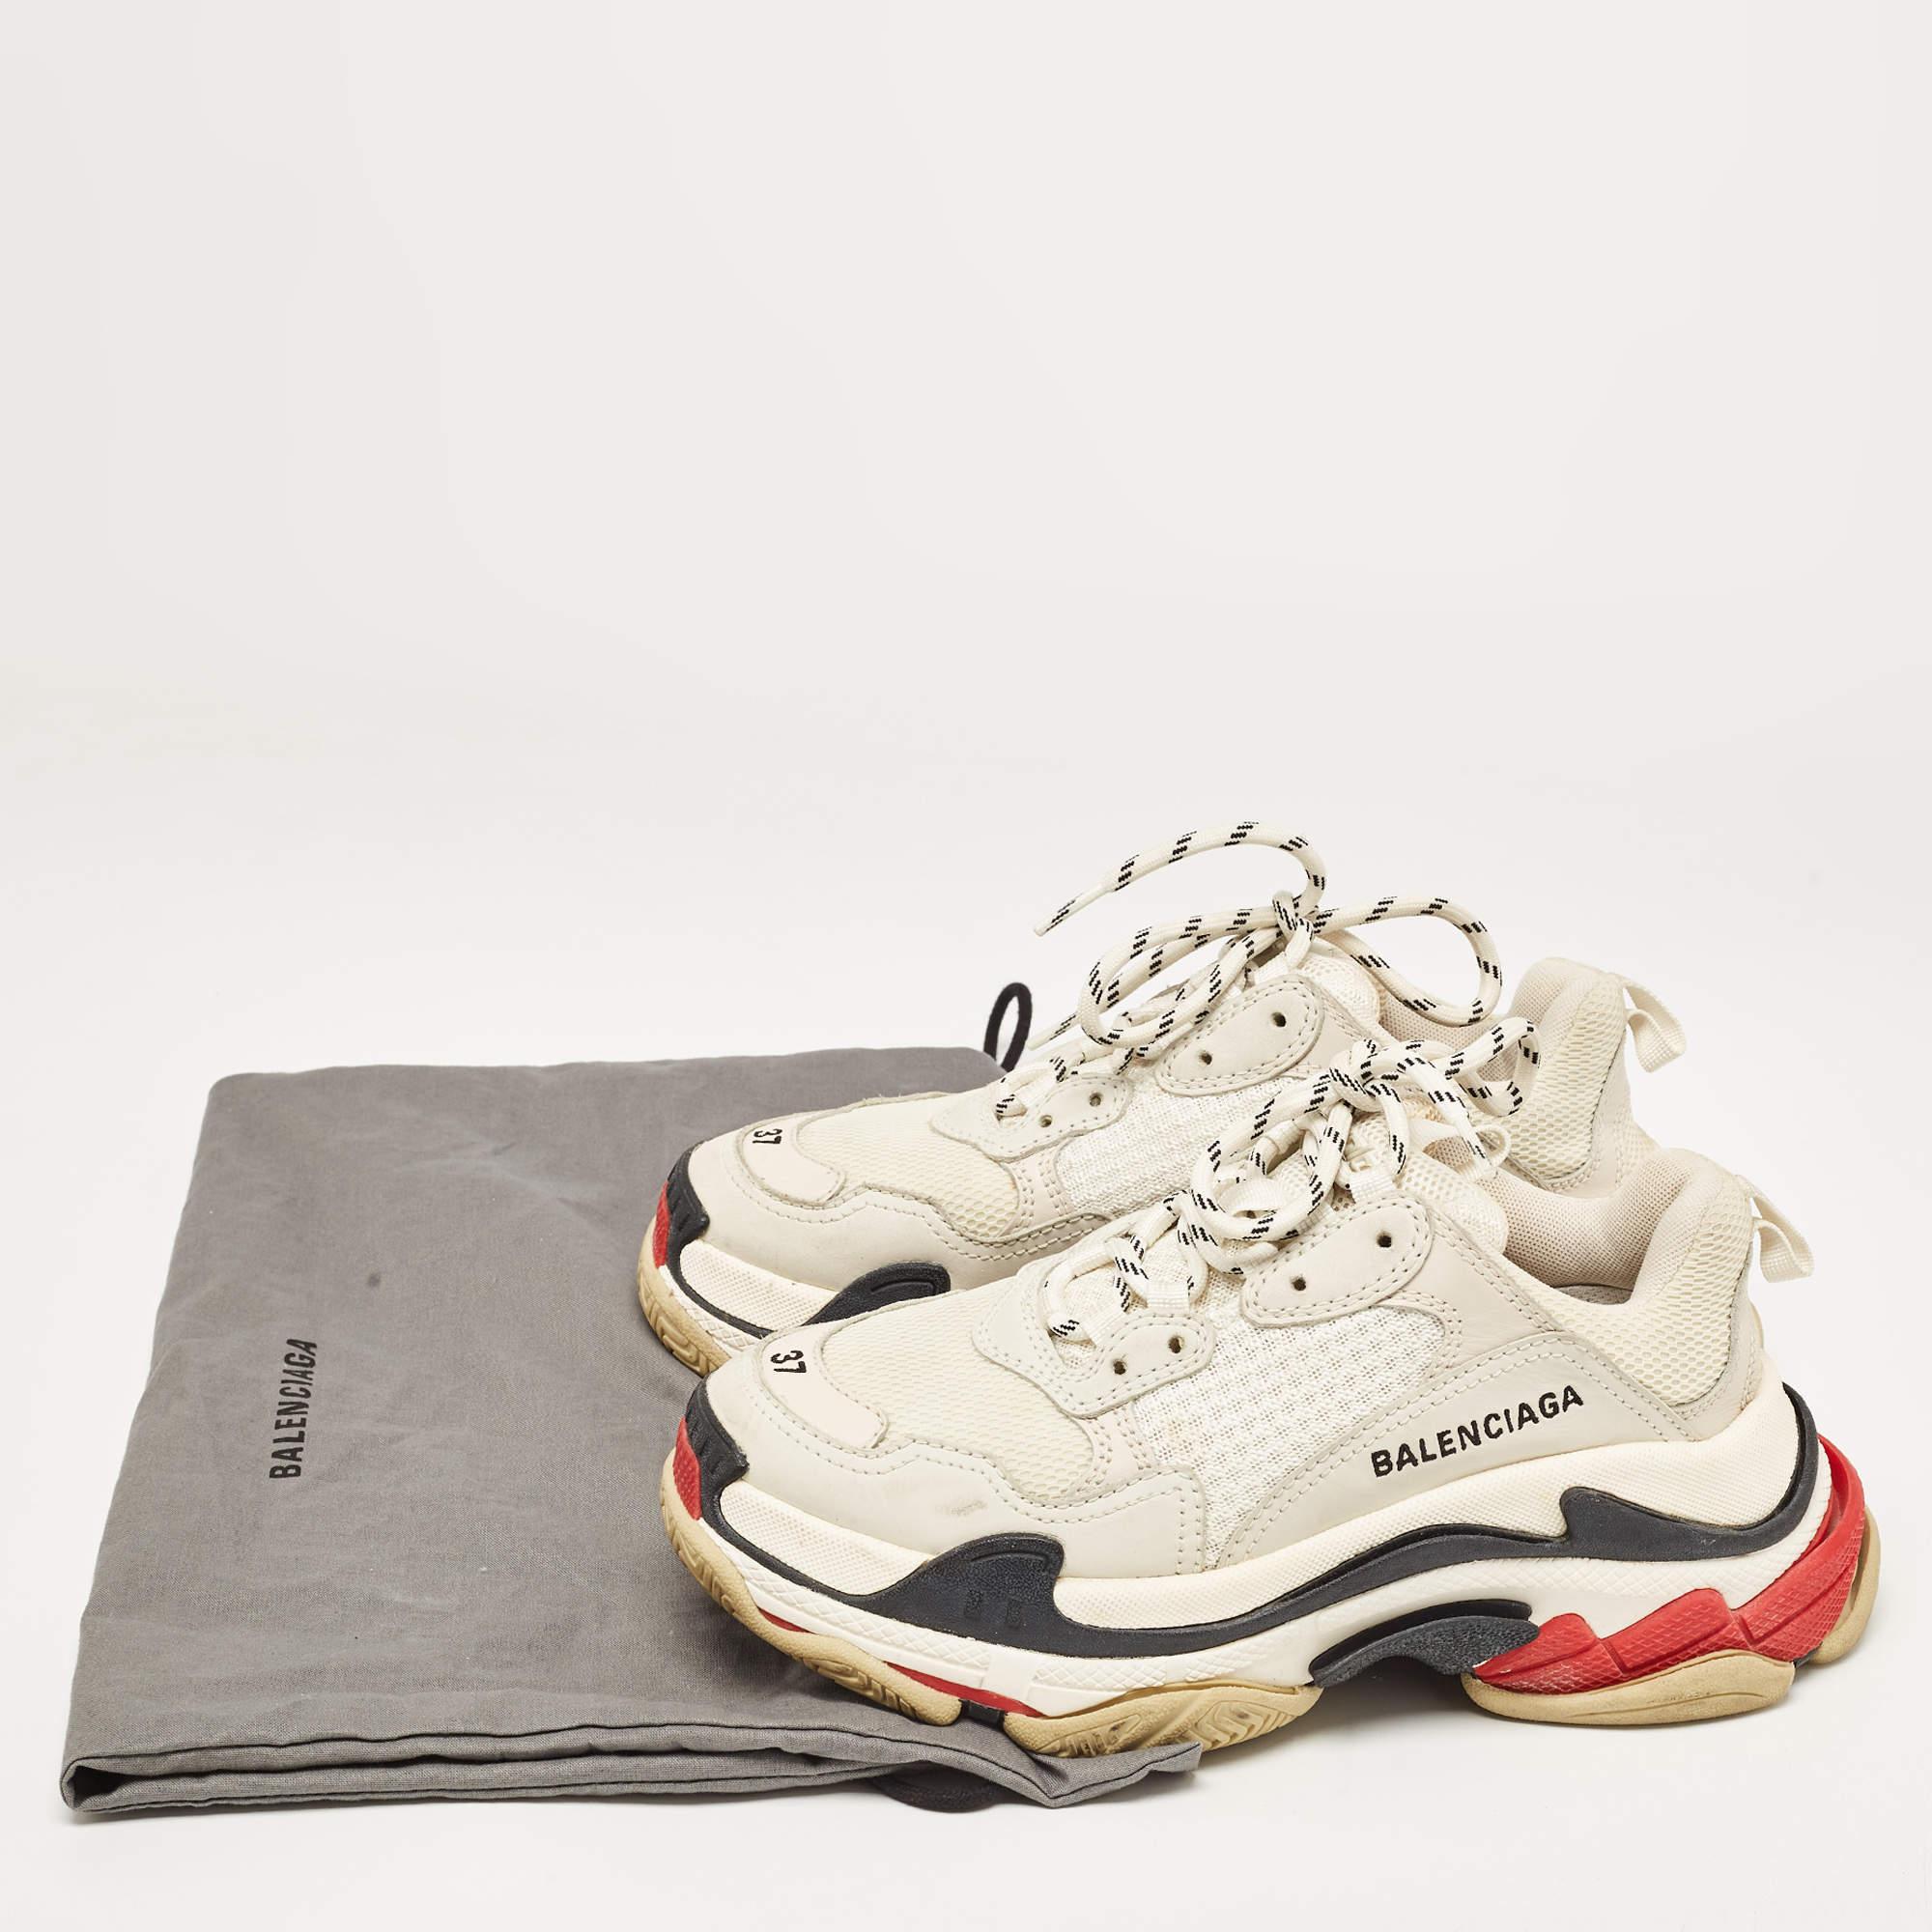 Balenciaga Multicolor Mesh and Nubuck Leather Triple S Low Top Sneakers Size 37 For Sale 5